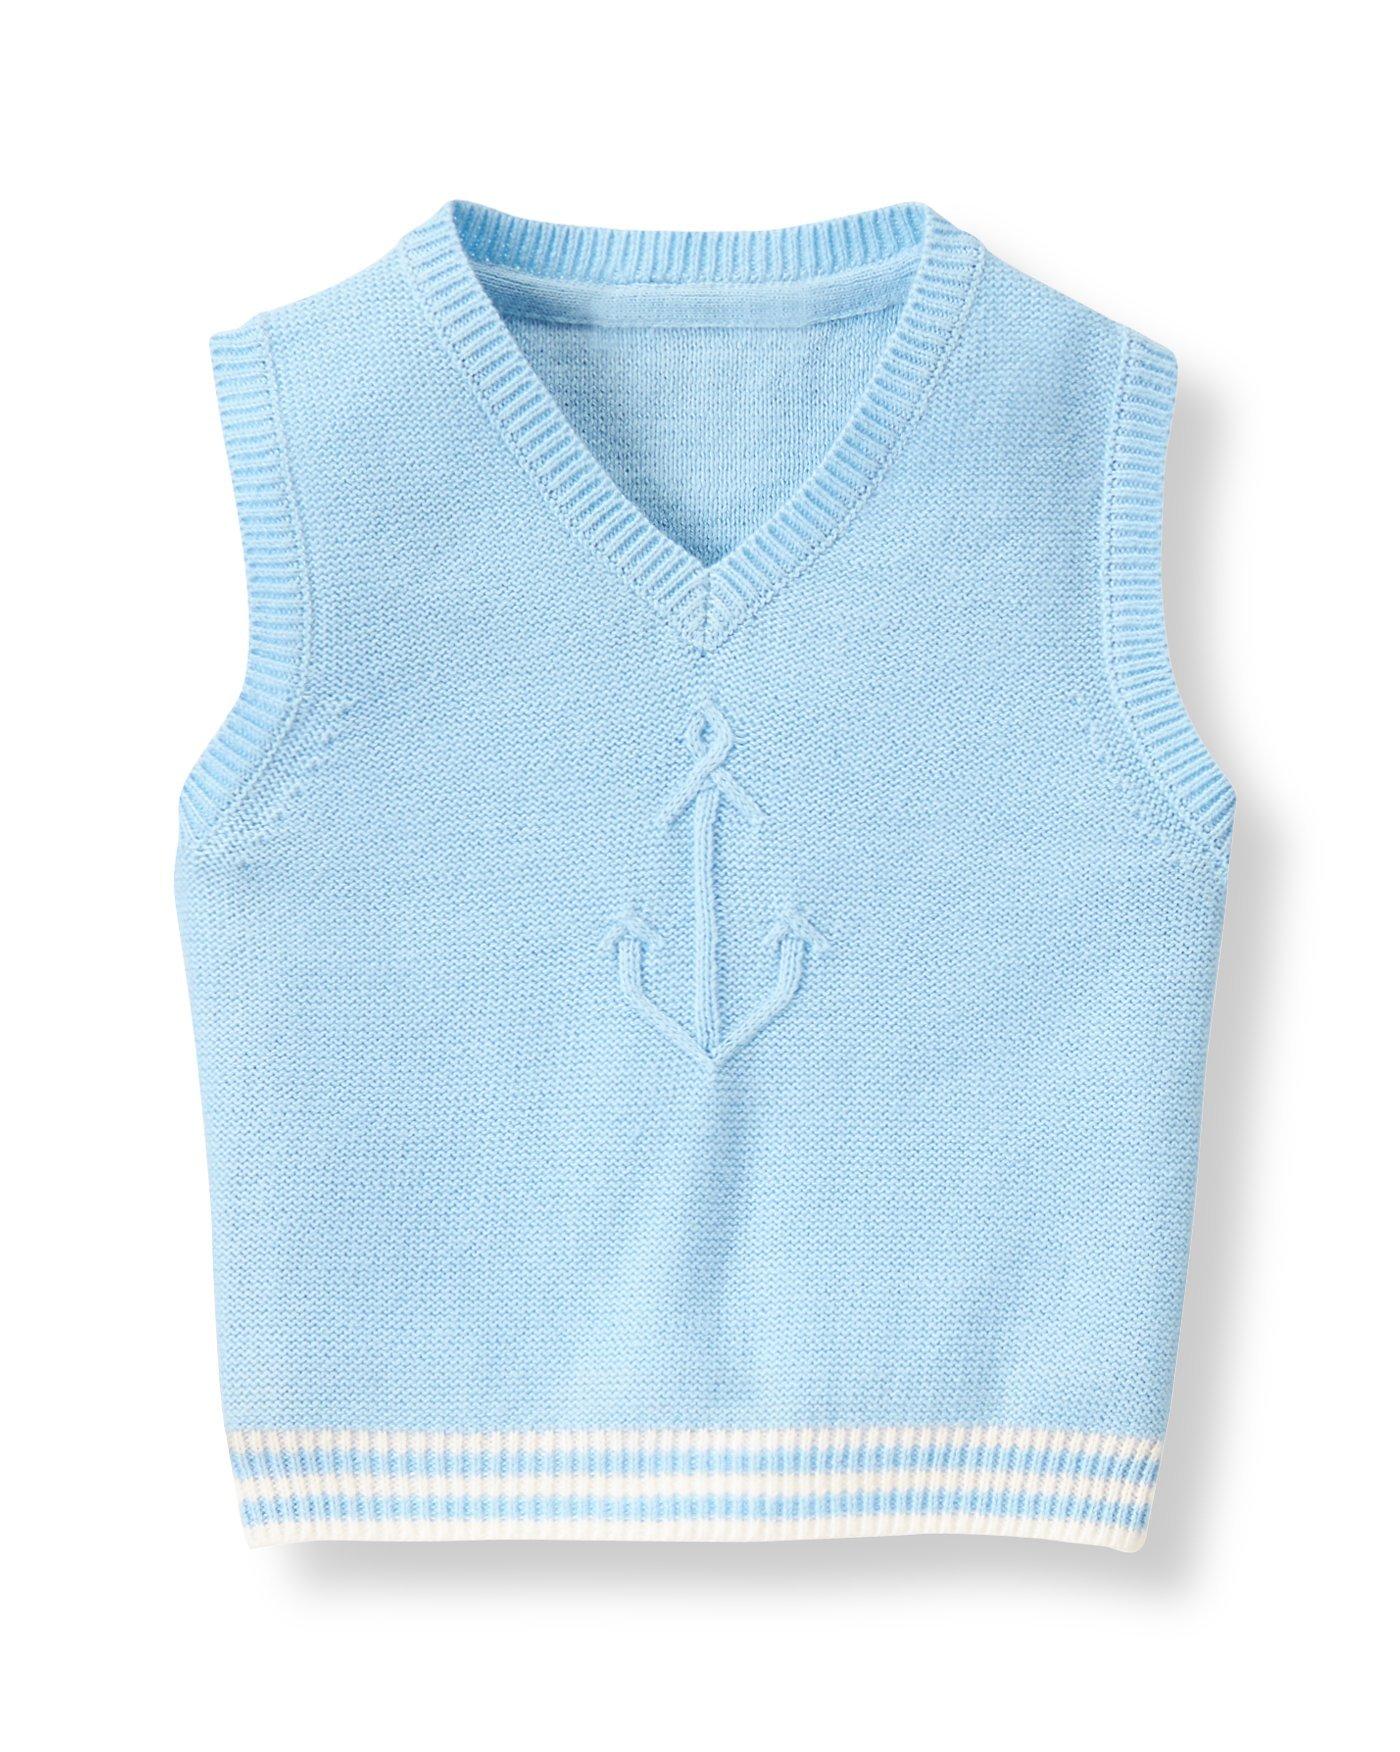 Anchor Icon Sweater Vest image number 0